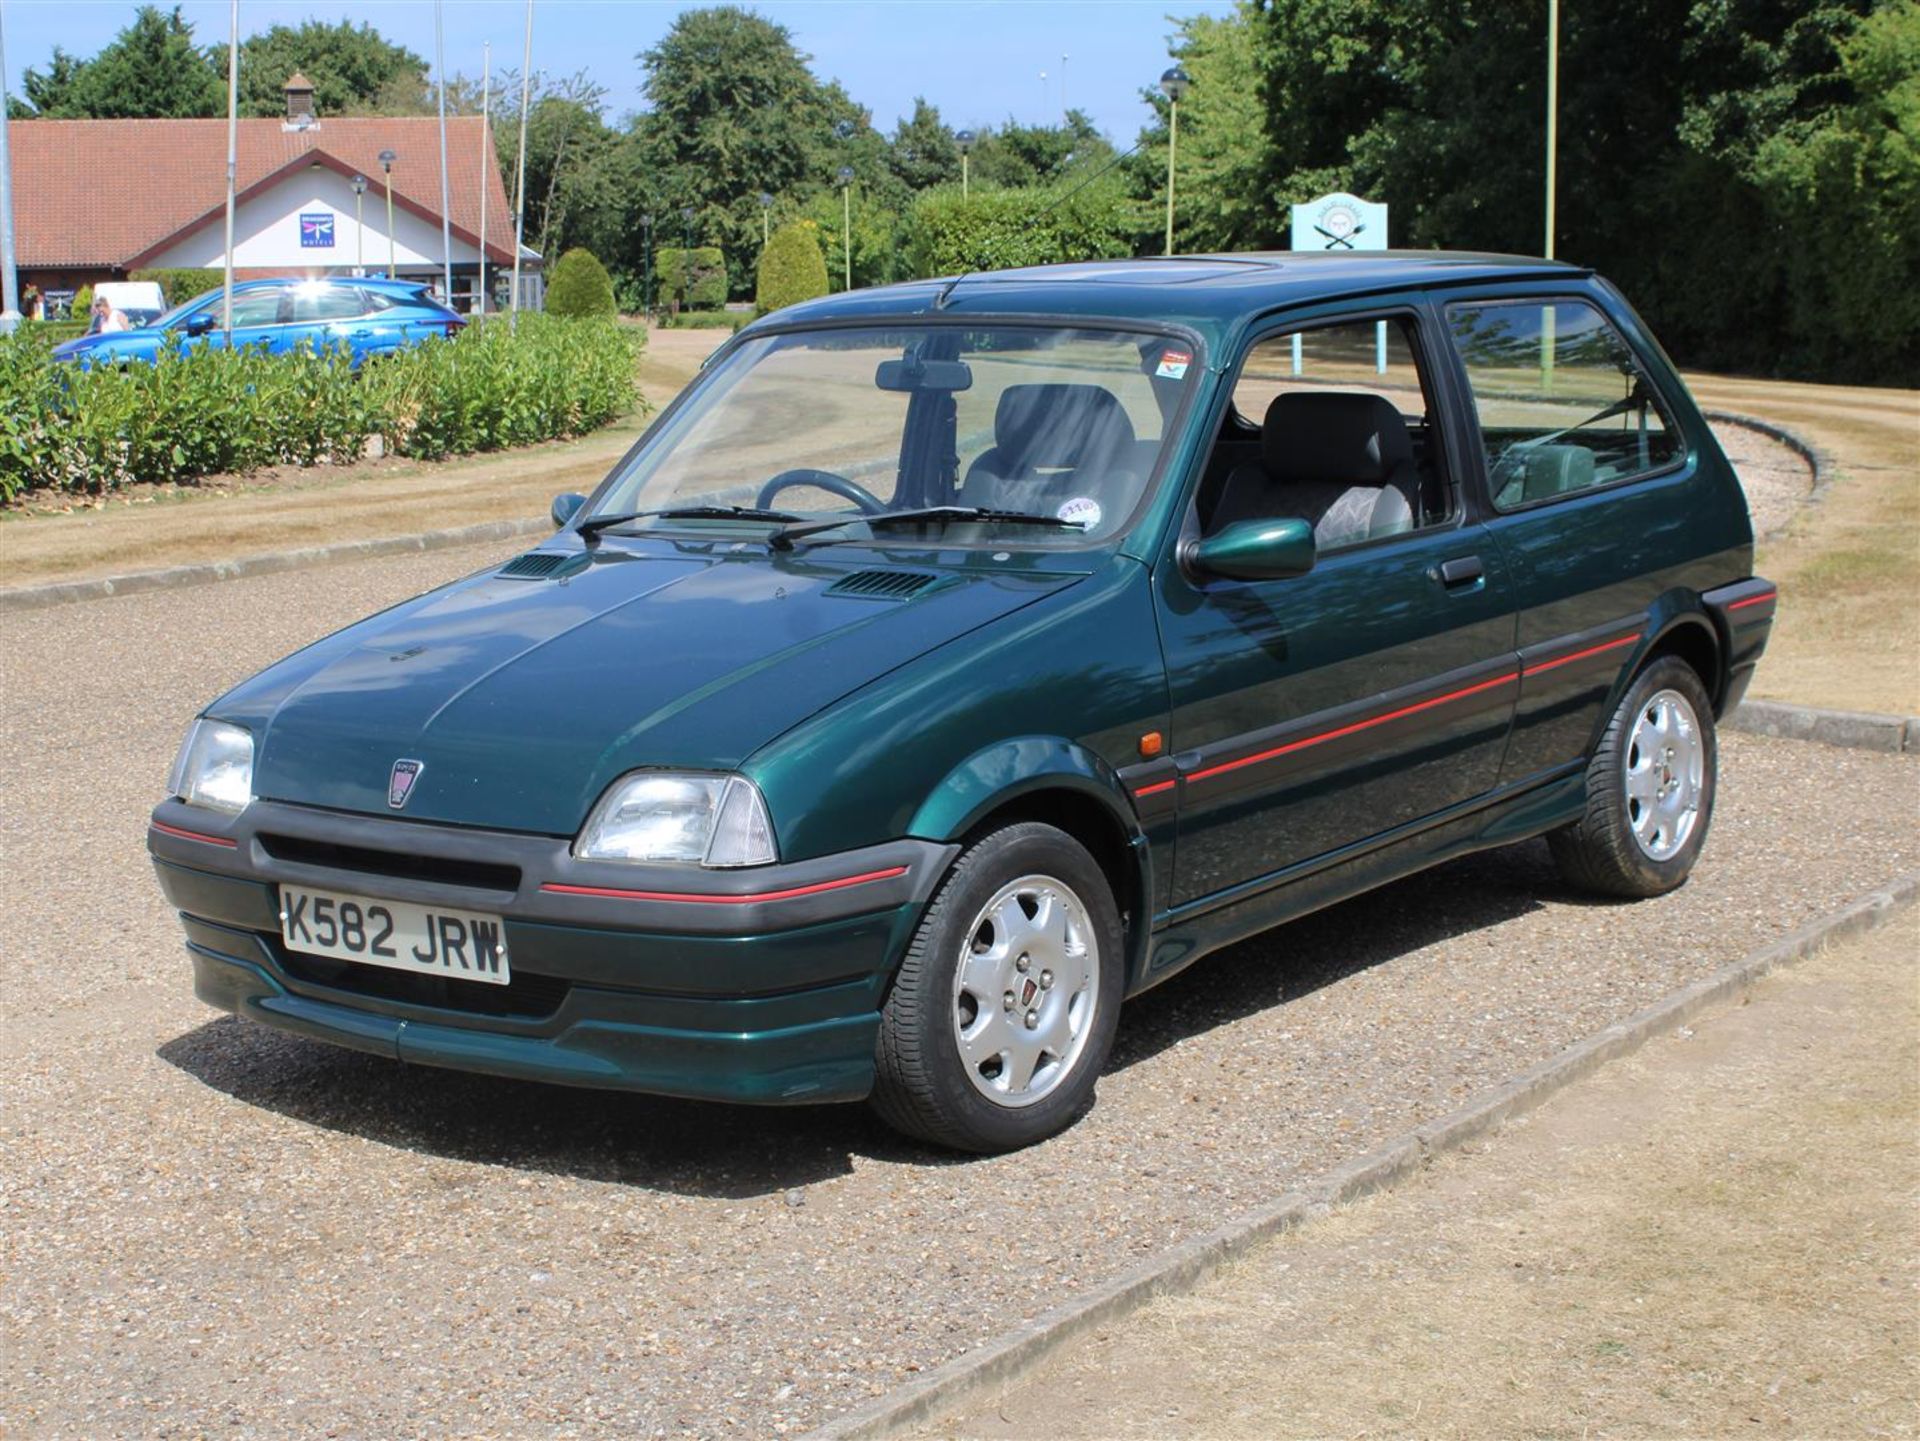 1993 Rover Metro 1.4 GTi 16v 39,675 miles from new - Image 3 of 19